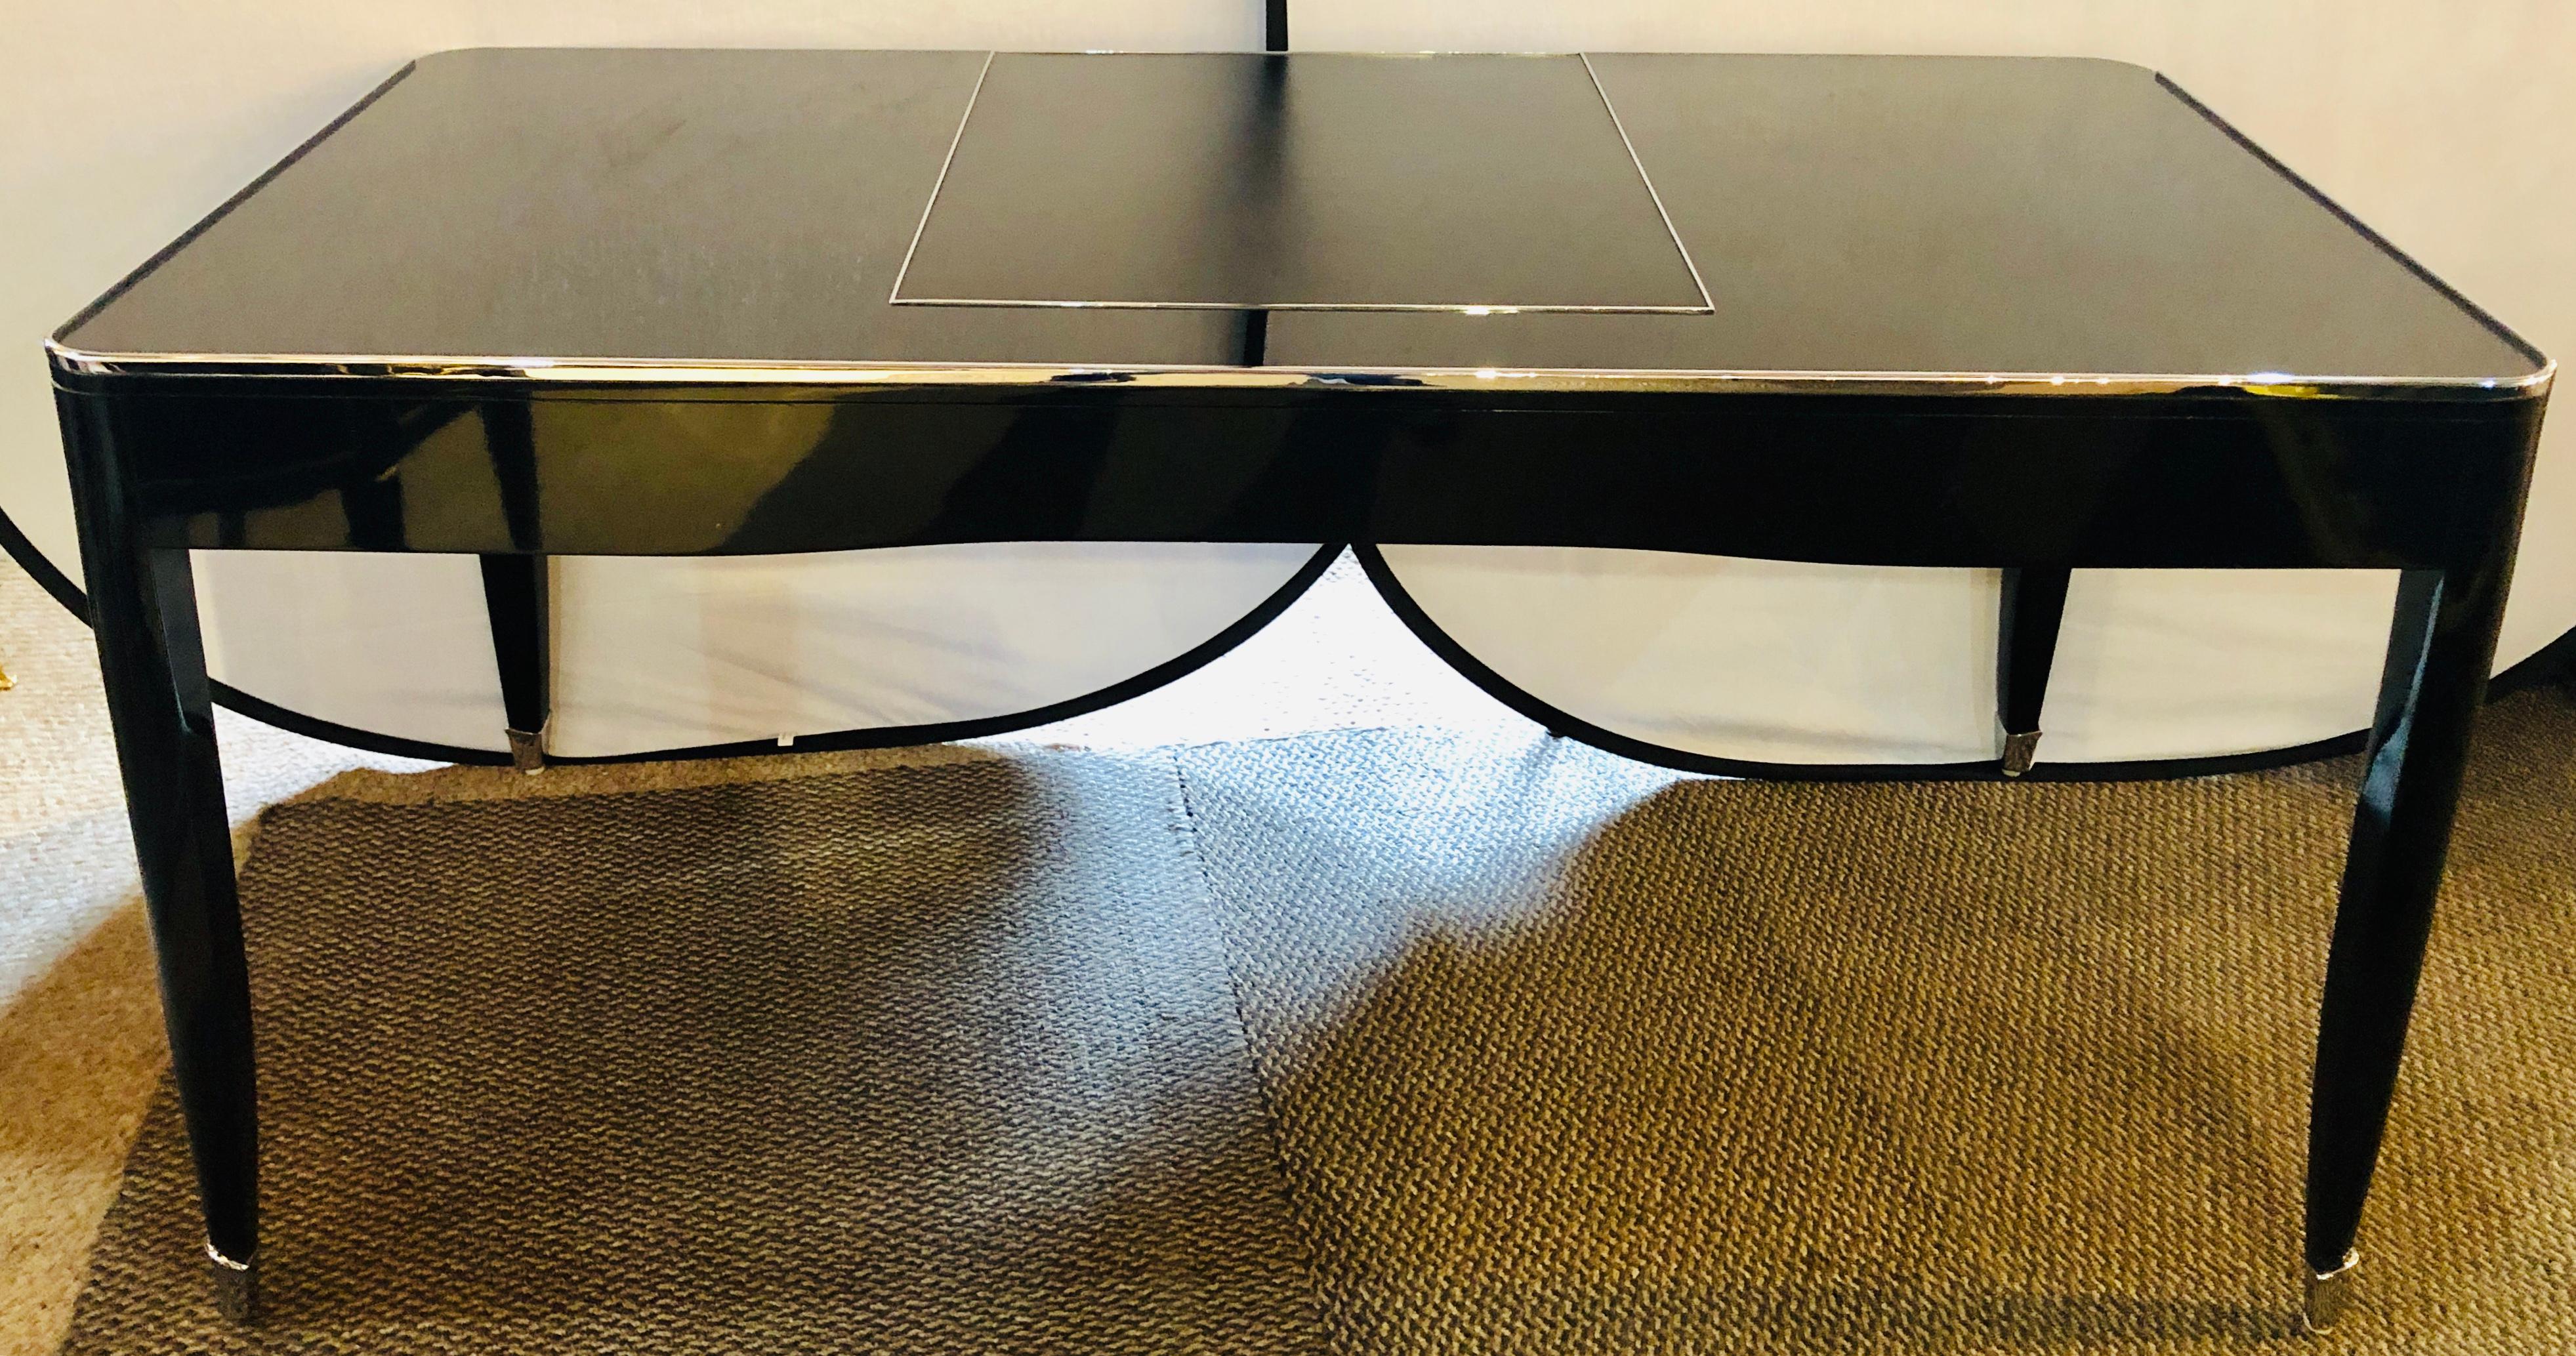 One fifth Paris desk by Ralph Lauren-Black lacquered with chrome accents. Stamped Ralph Lauren an Ebony chrome and leather top desk. Brand New! Retails at $14,000.